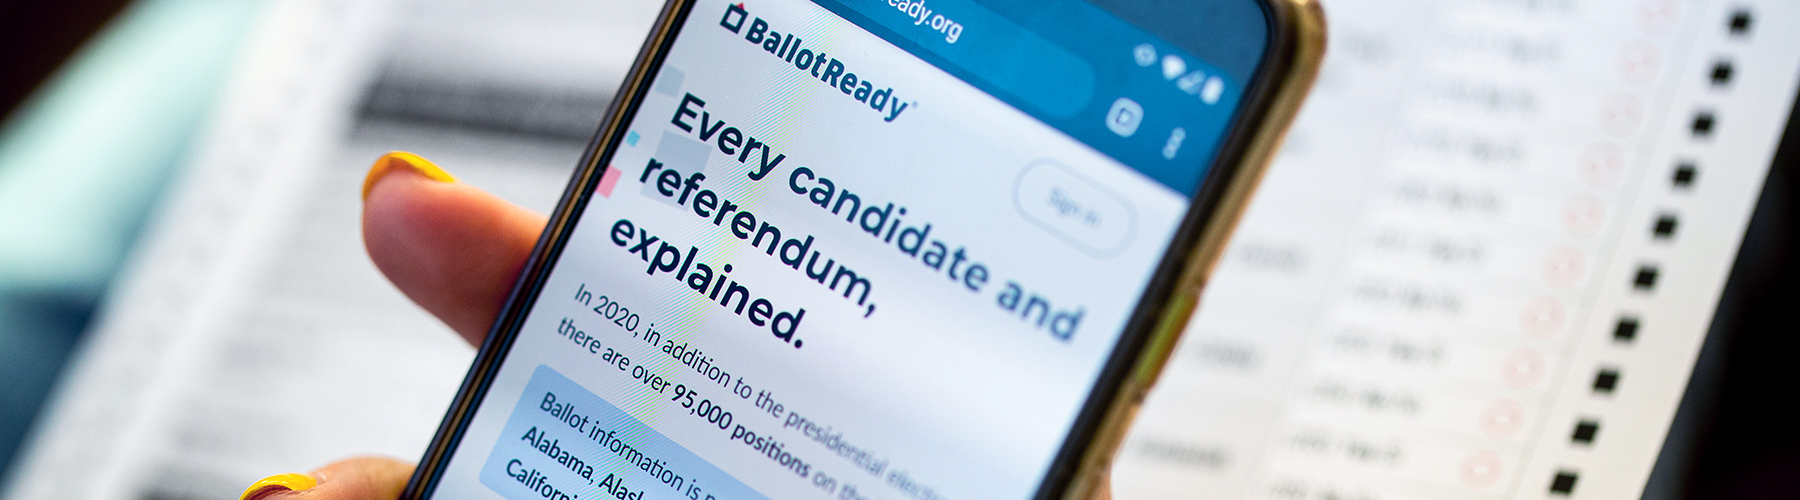 BallotReady, created by Loyola University Chicago alumnus Sebastian Ellefson, is a website that provides personalized ballots and nonpartisan information to voters in all 50 states.